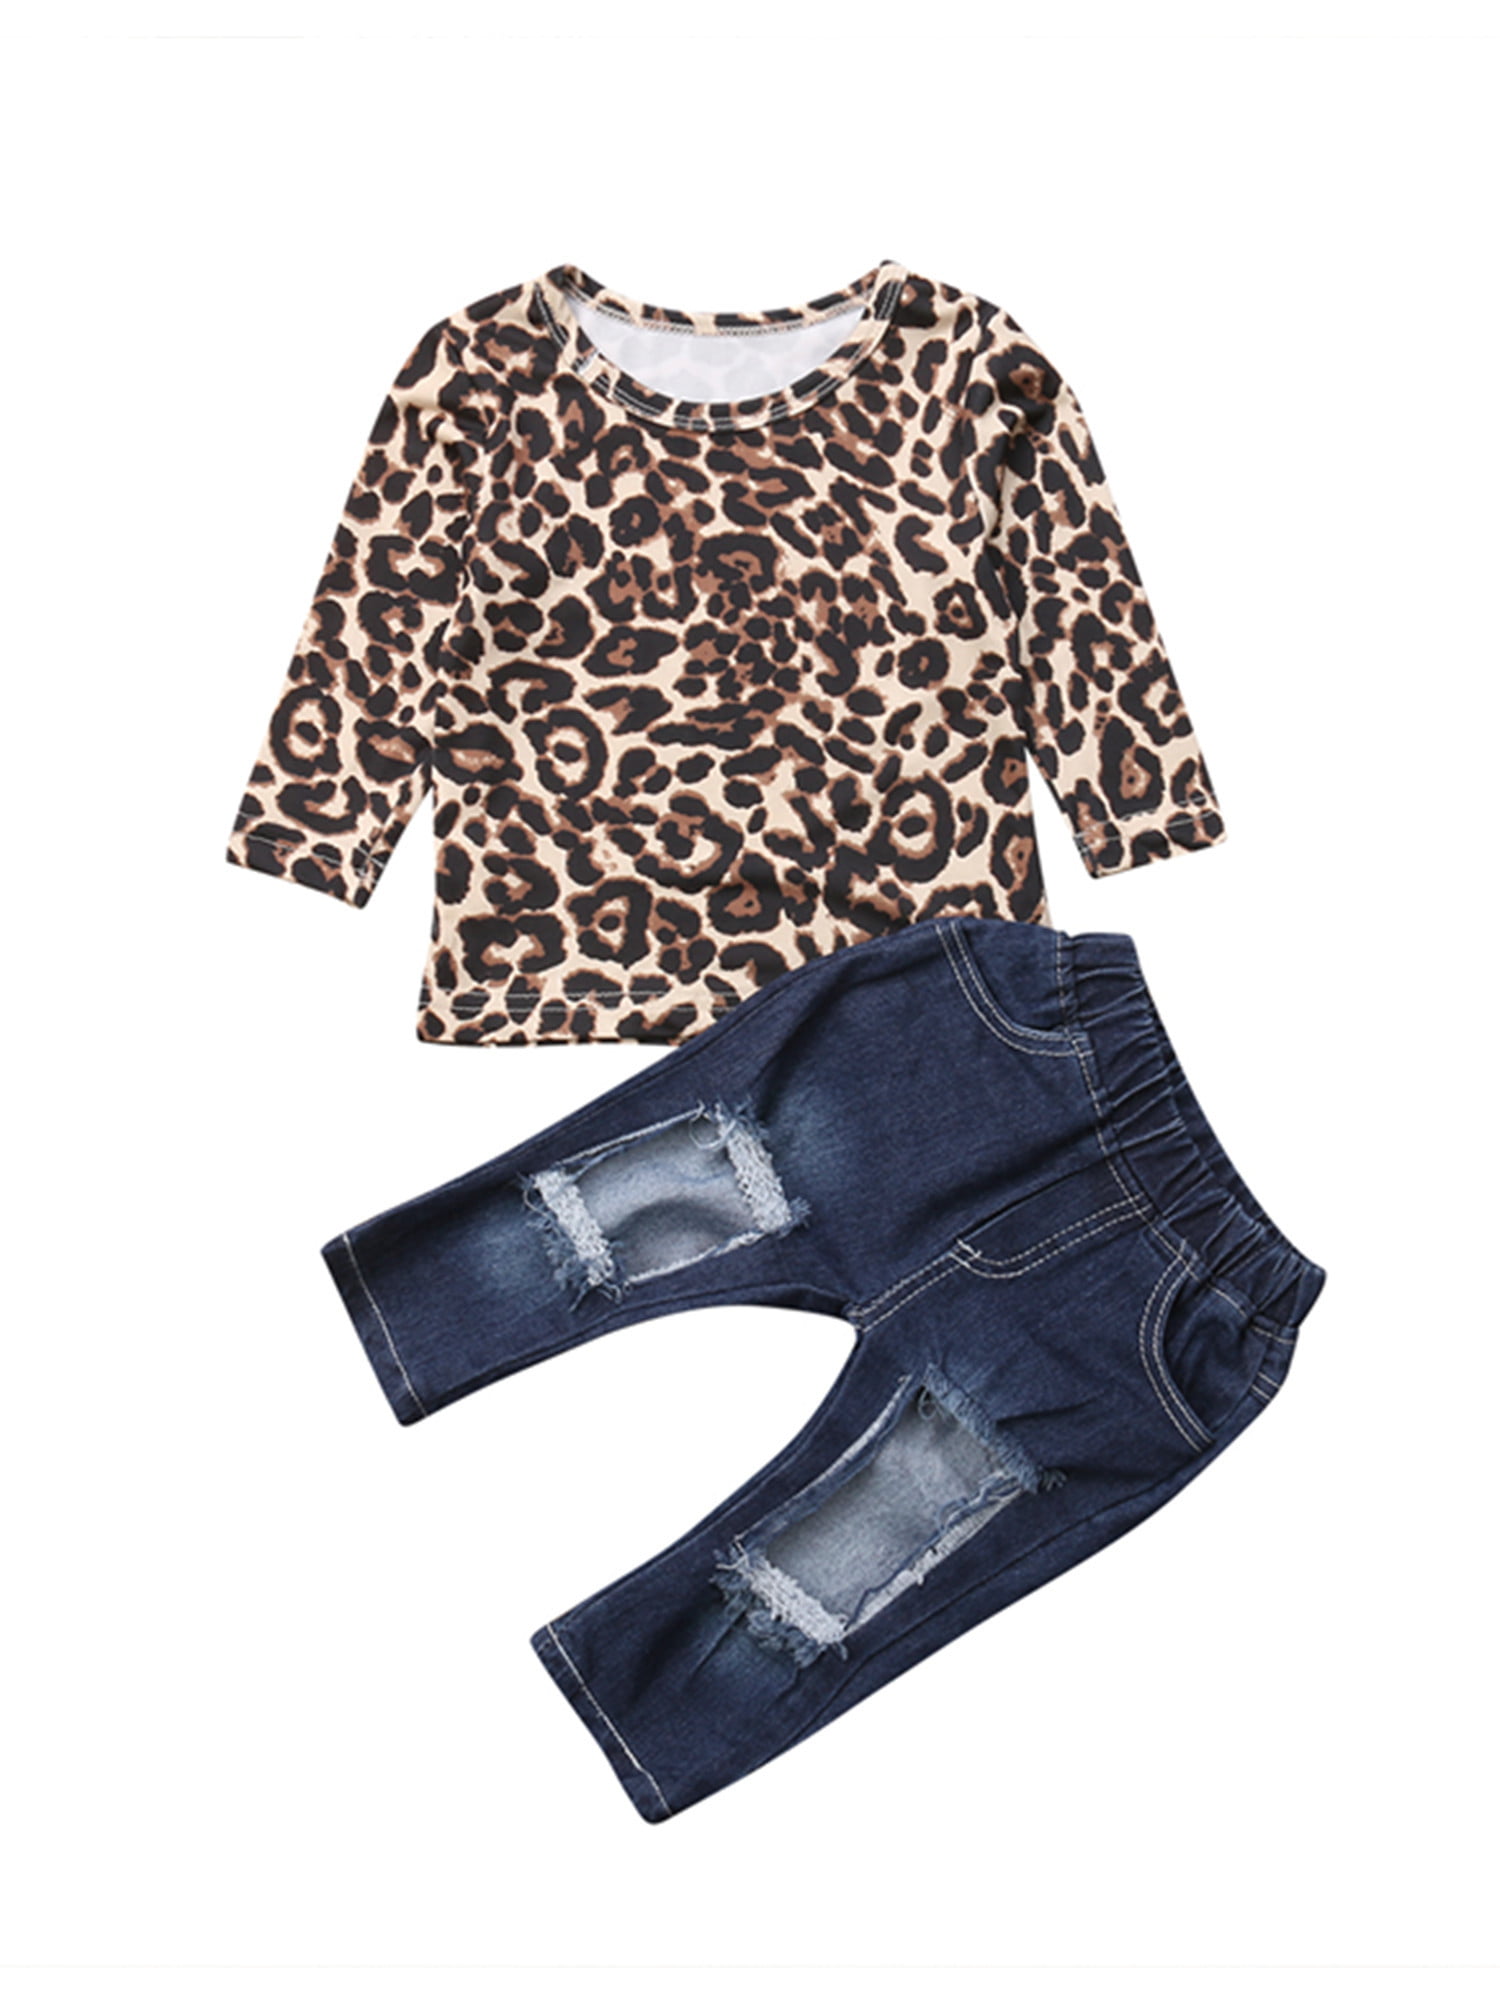 Toddler Girl Clothes Cute Baby Outfits Tshirt Leopard Long Sleeve Ruffle Top Denim Ripped Jeans Pants 2PCS Sets 2T-5T 